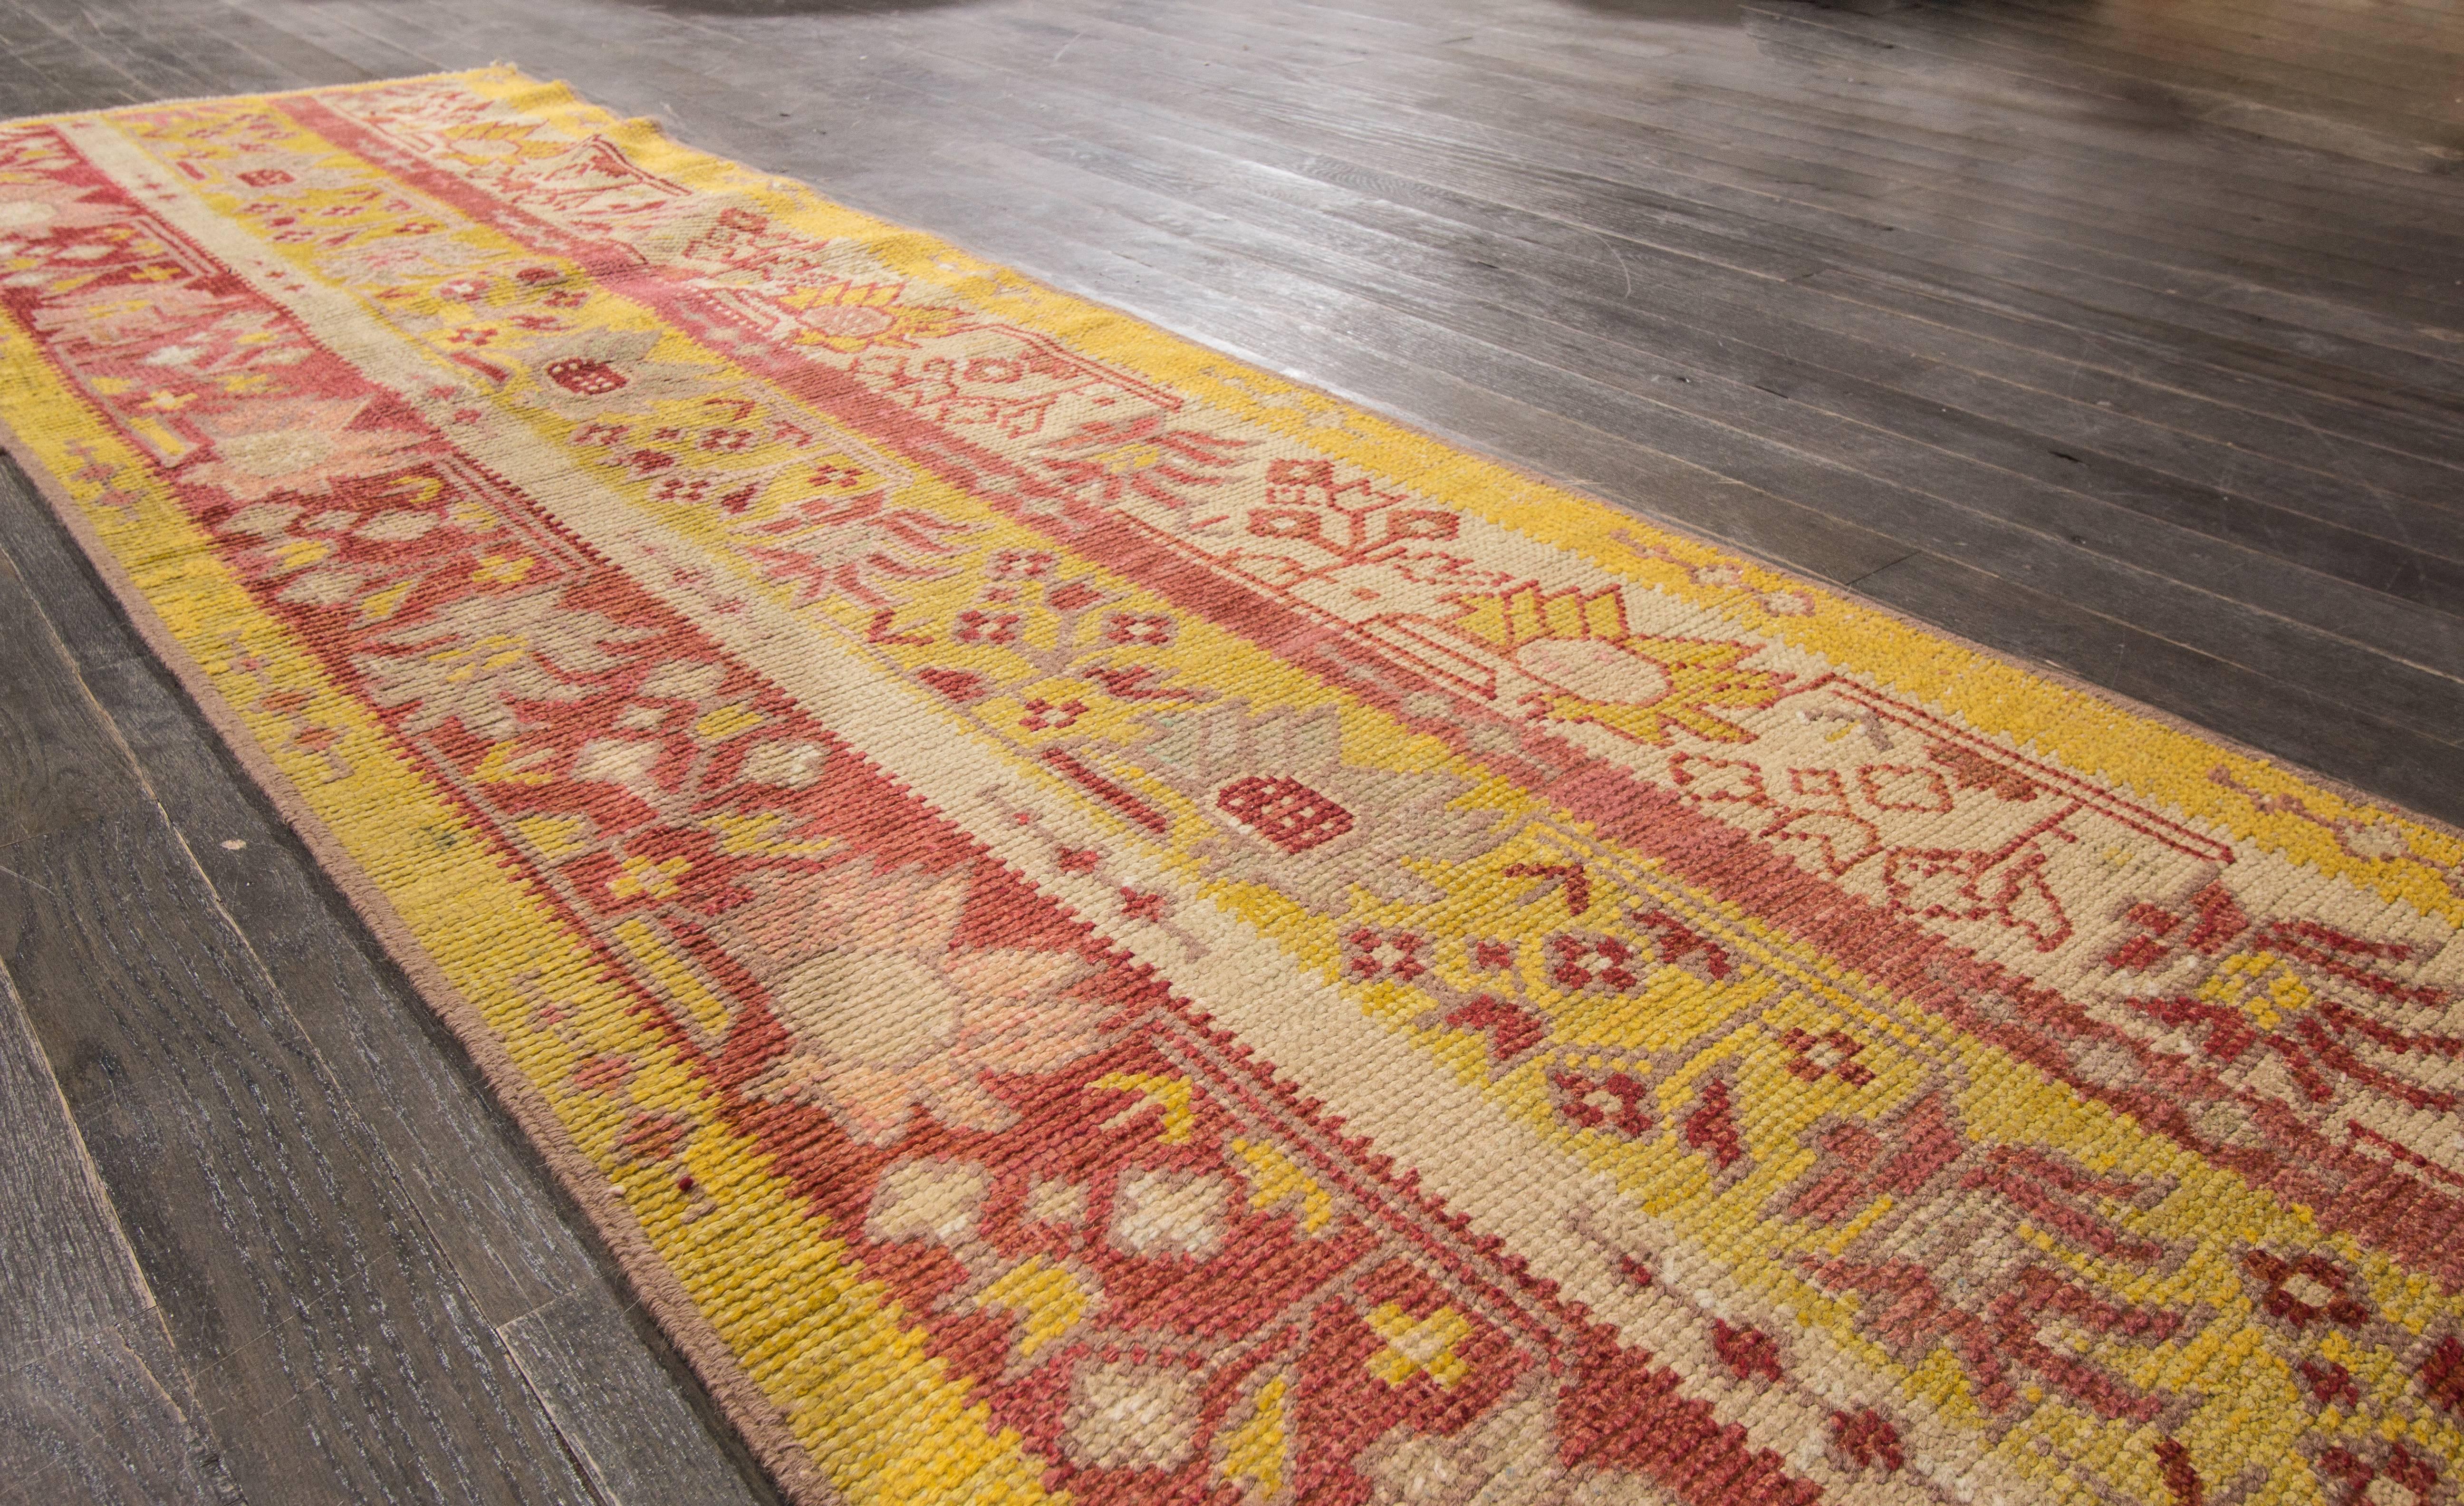 Hand-knotted rug with a floral design on a red field with yellow borders. 

This rug has magnificent detailing and would be perfect for any room. Measures: 2.6